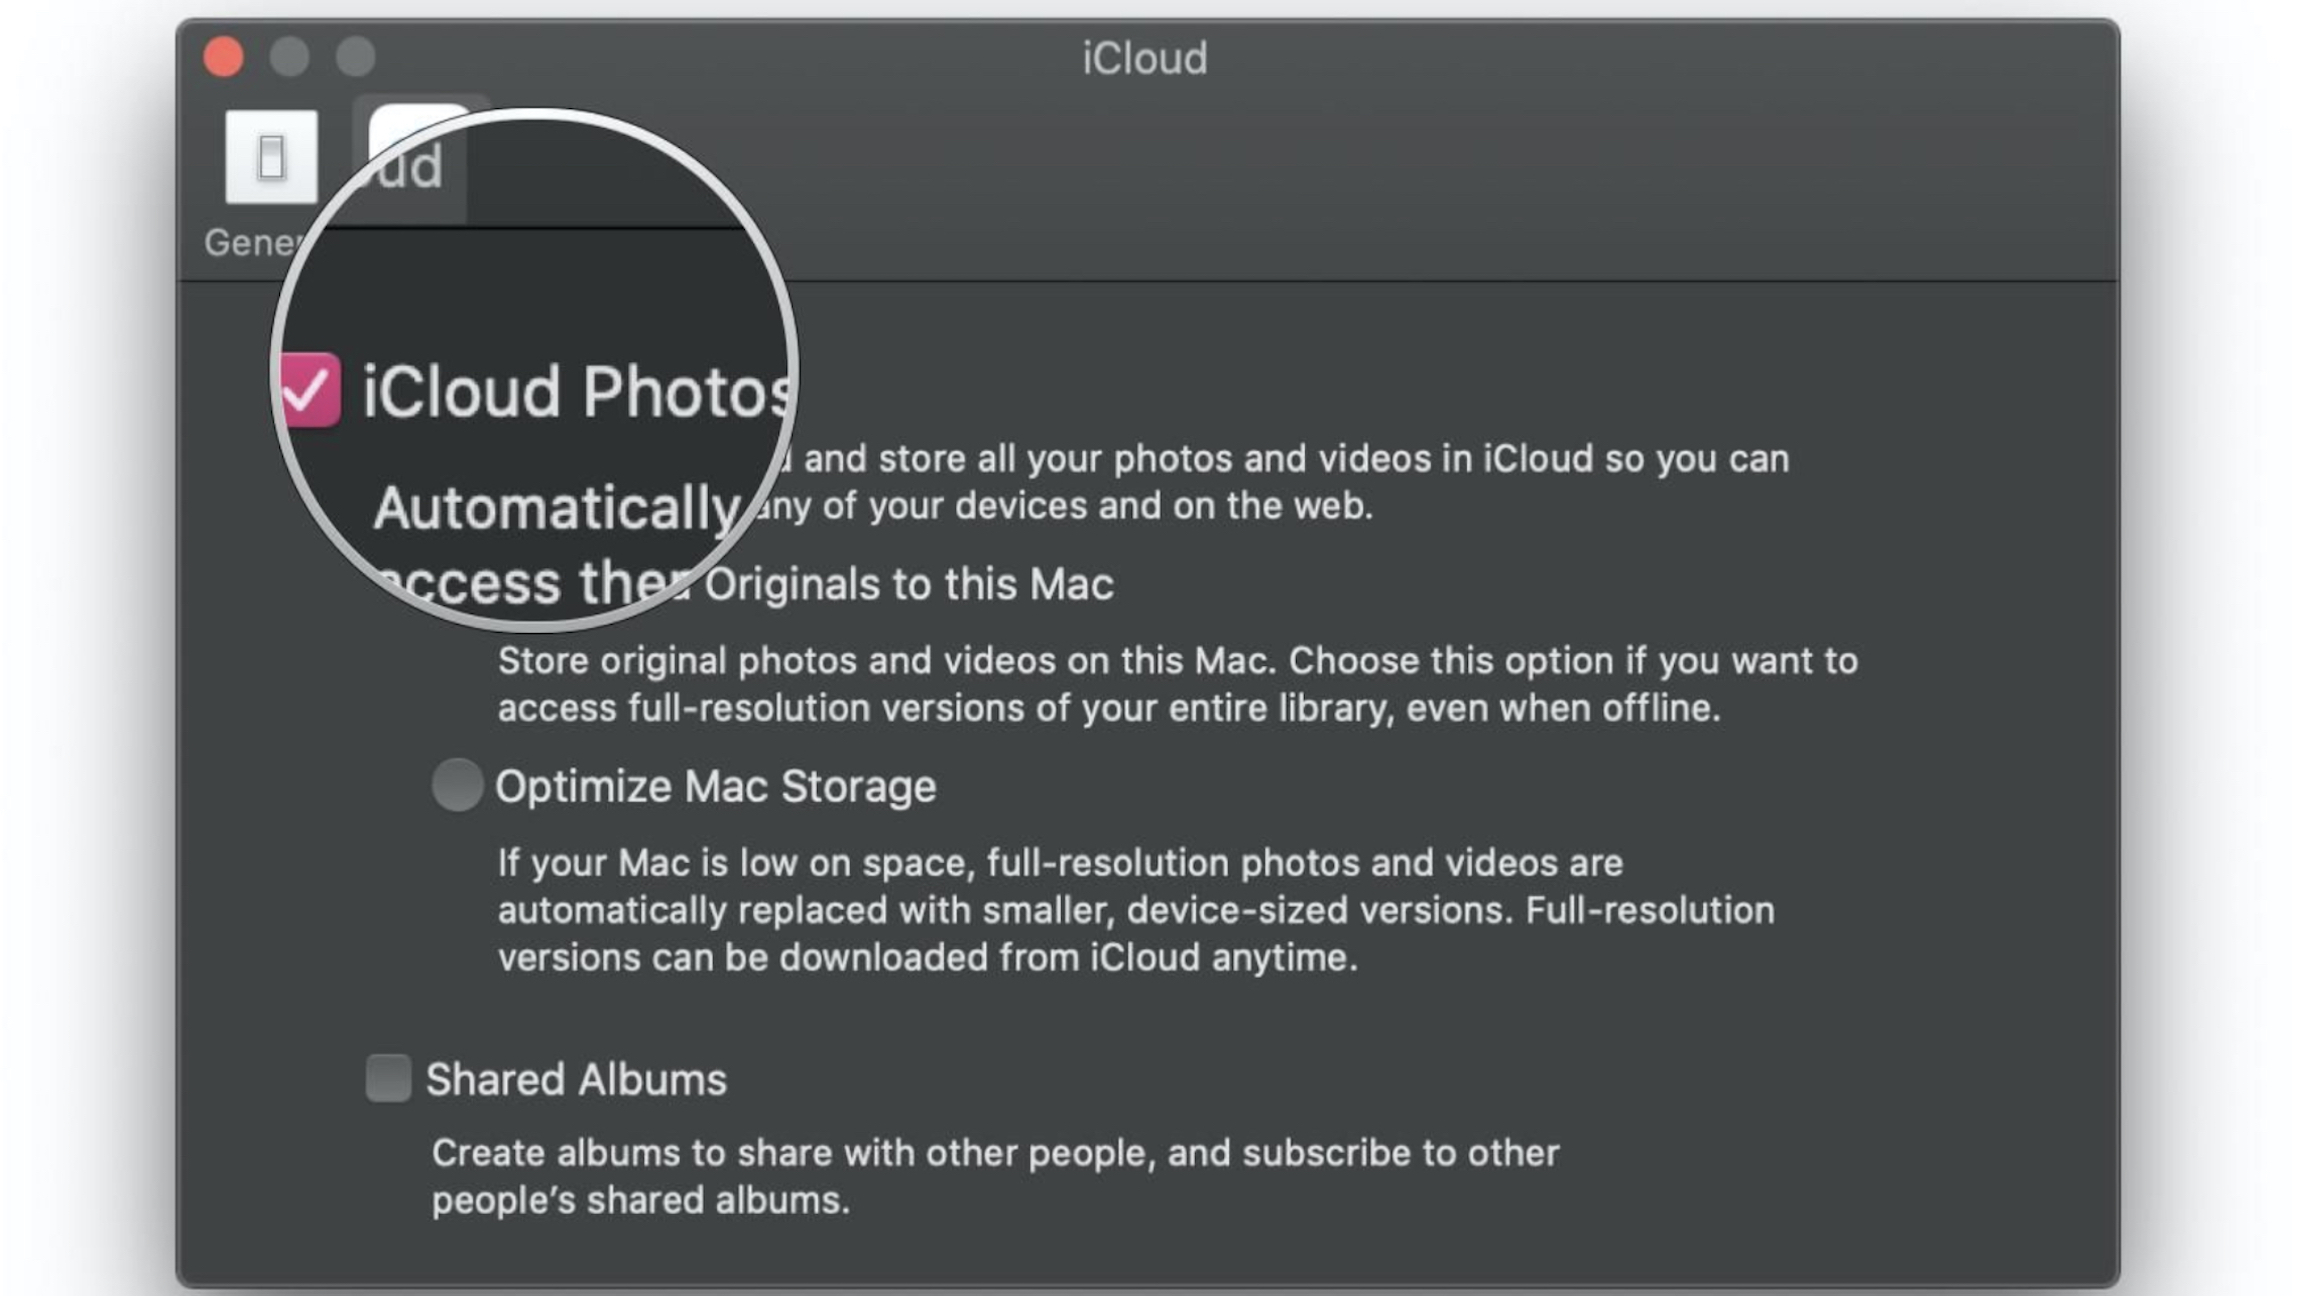 Upload photos and video with iCloud Photo Library by showing steps: Launch Photos, go into Preferences, then check off box for iCloud Photo Library